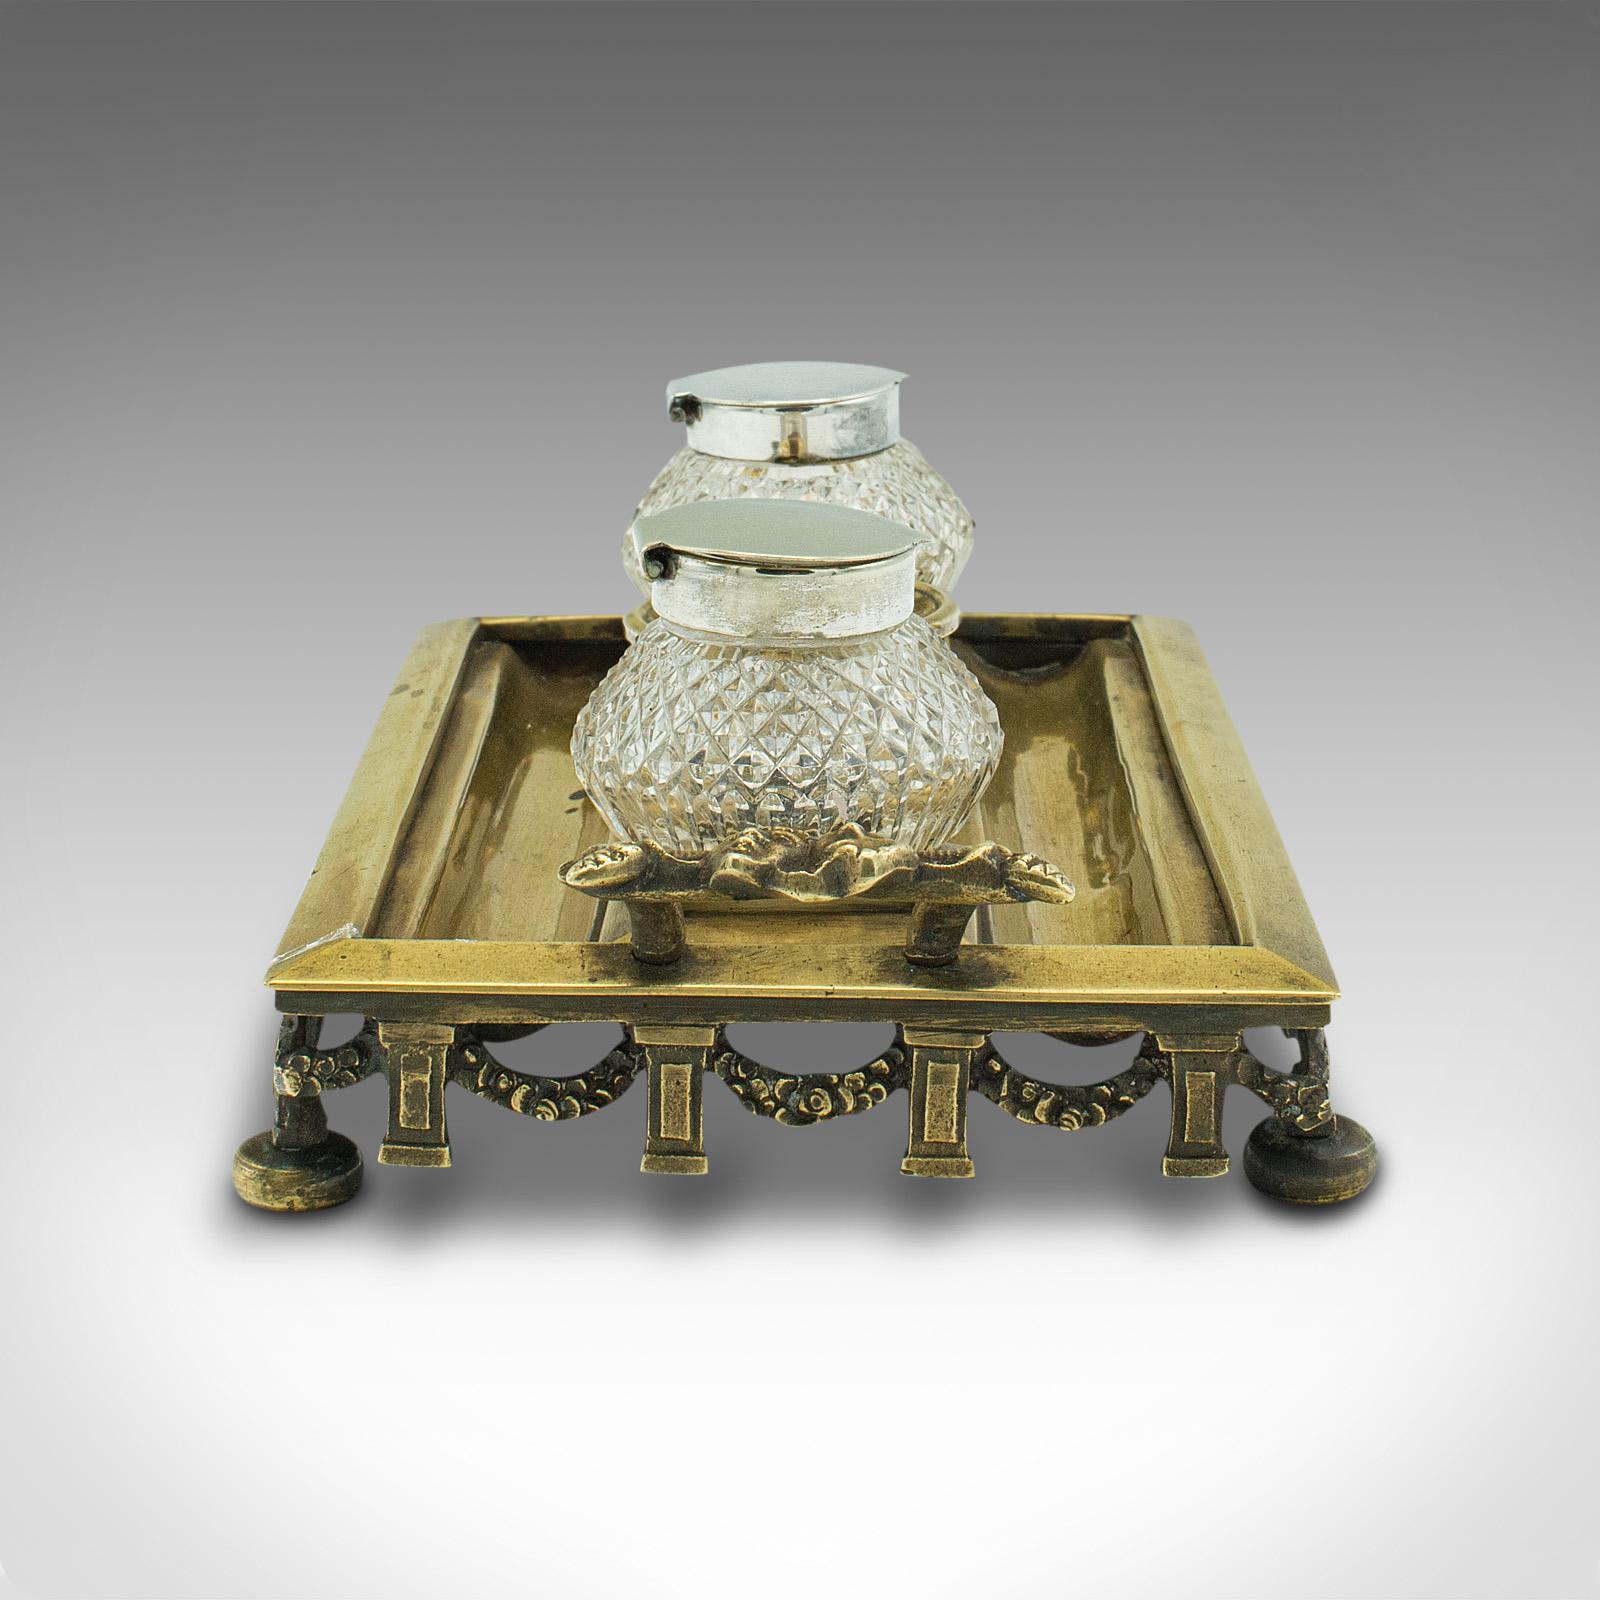 British Antique Pen Tray, English, Brass, Silver Plate, Inkwell Stand, Edwardian, C.1910 For Sale